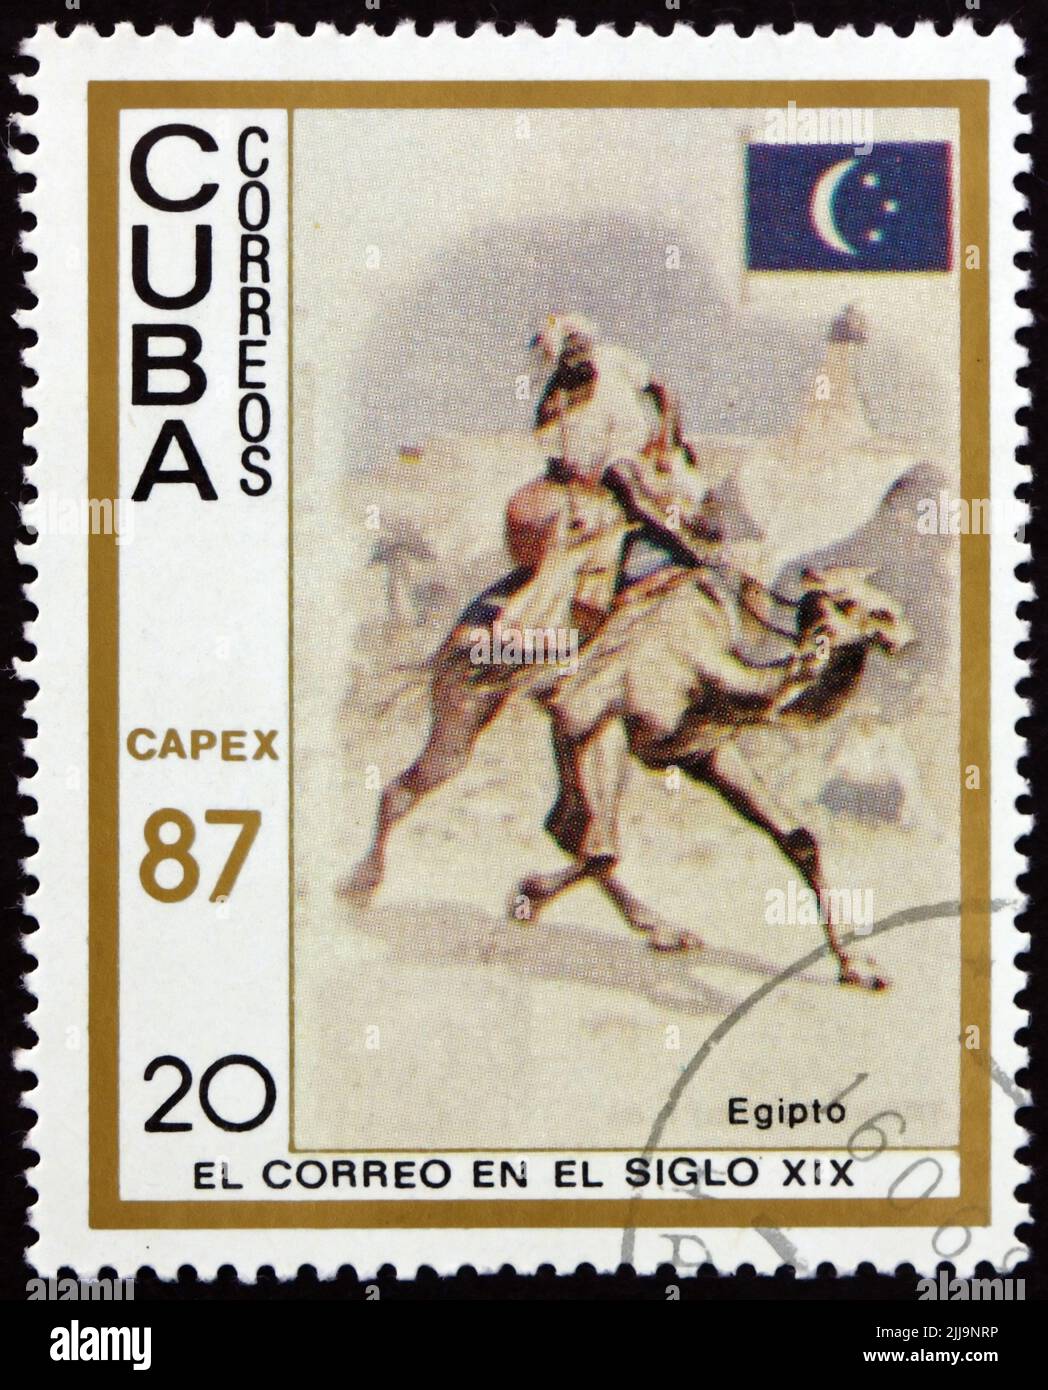 CUBA - CIRCA 1987: a stamp printed in Cuba shows messenger riding camel from Egypt, 1879 mail carrier pictured on cigarette cards, circa 1987 Stock Photo